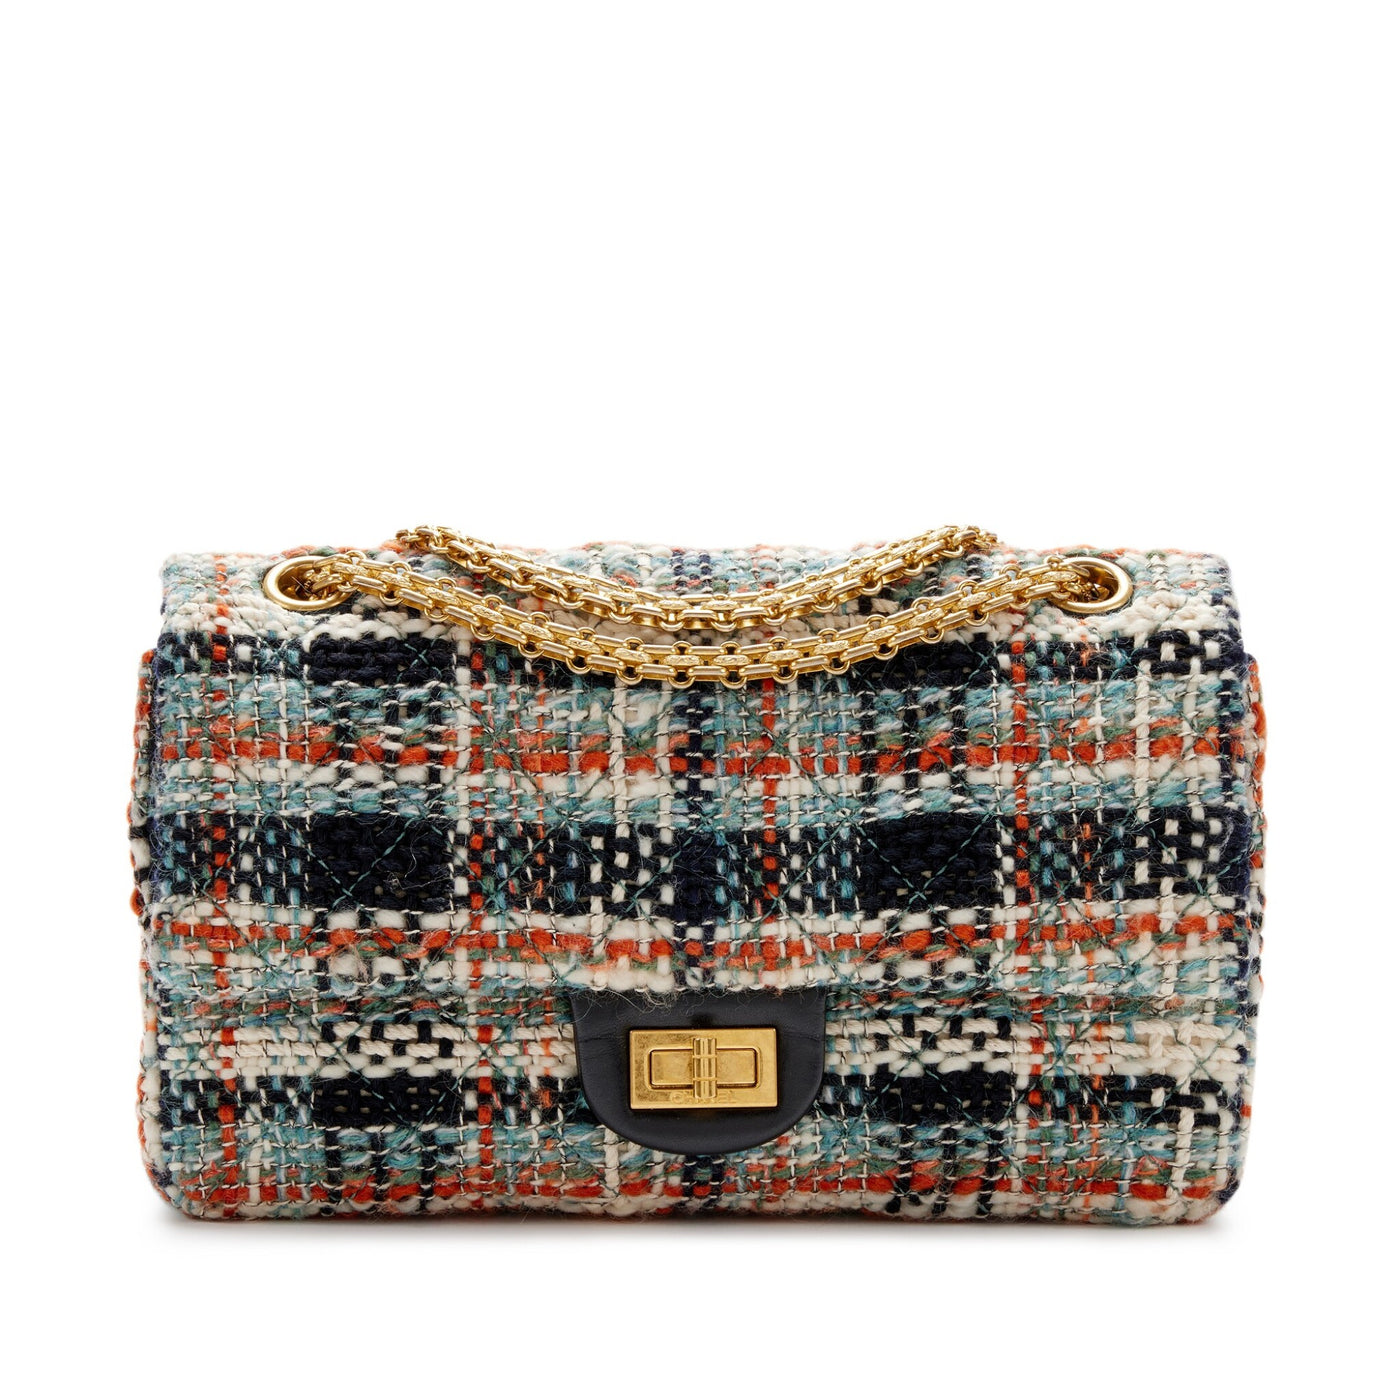 CHANEL Classic Double Flap Medium Tweed 2:55 Gold Hardware With Box RRP: £8530